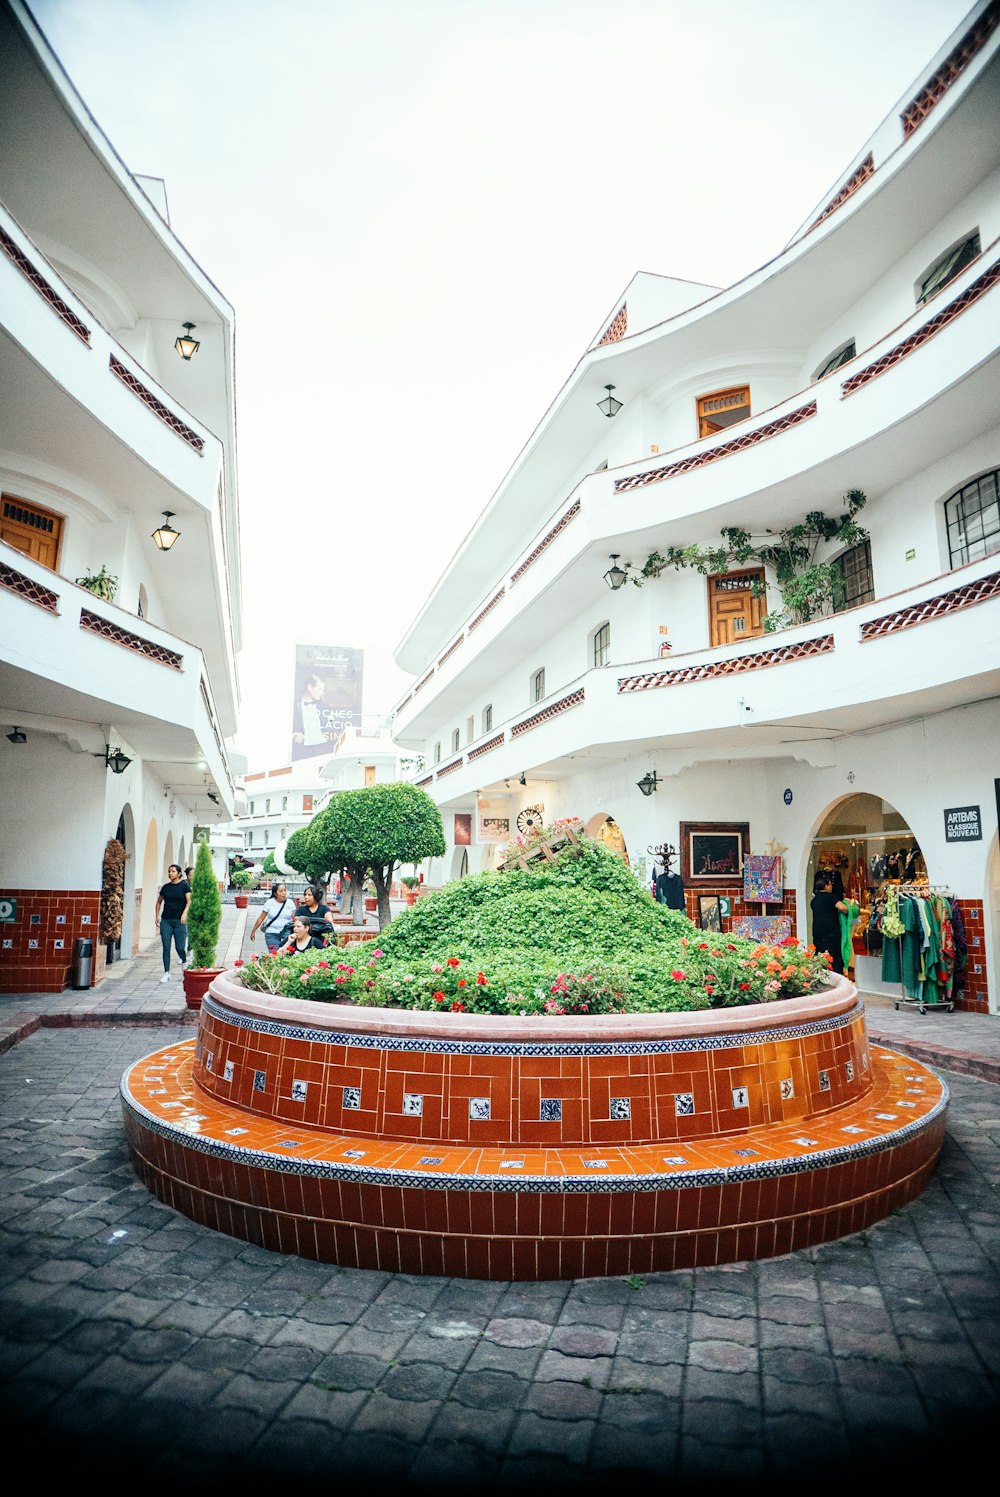 the courtyard of a building with a circular planter in the middle